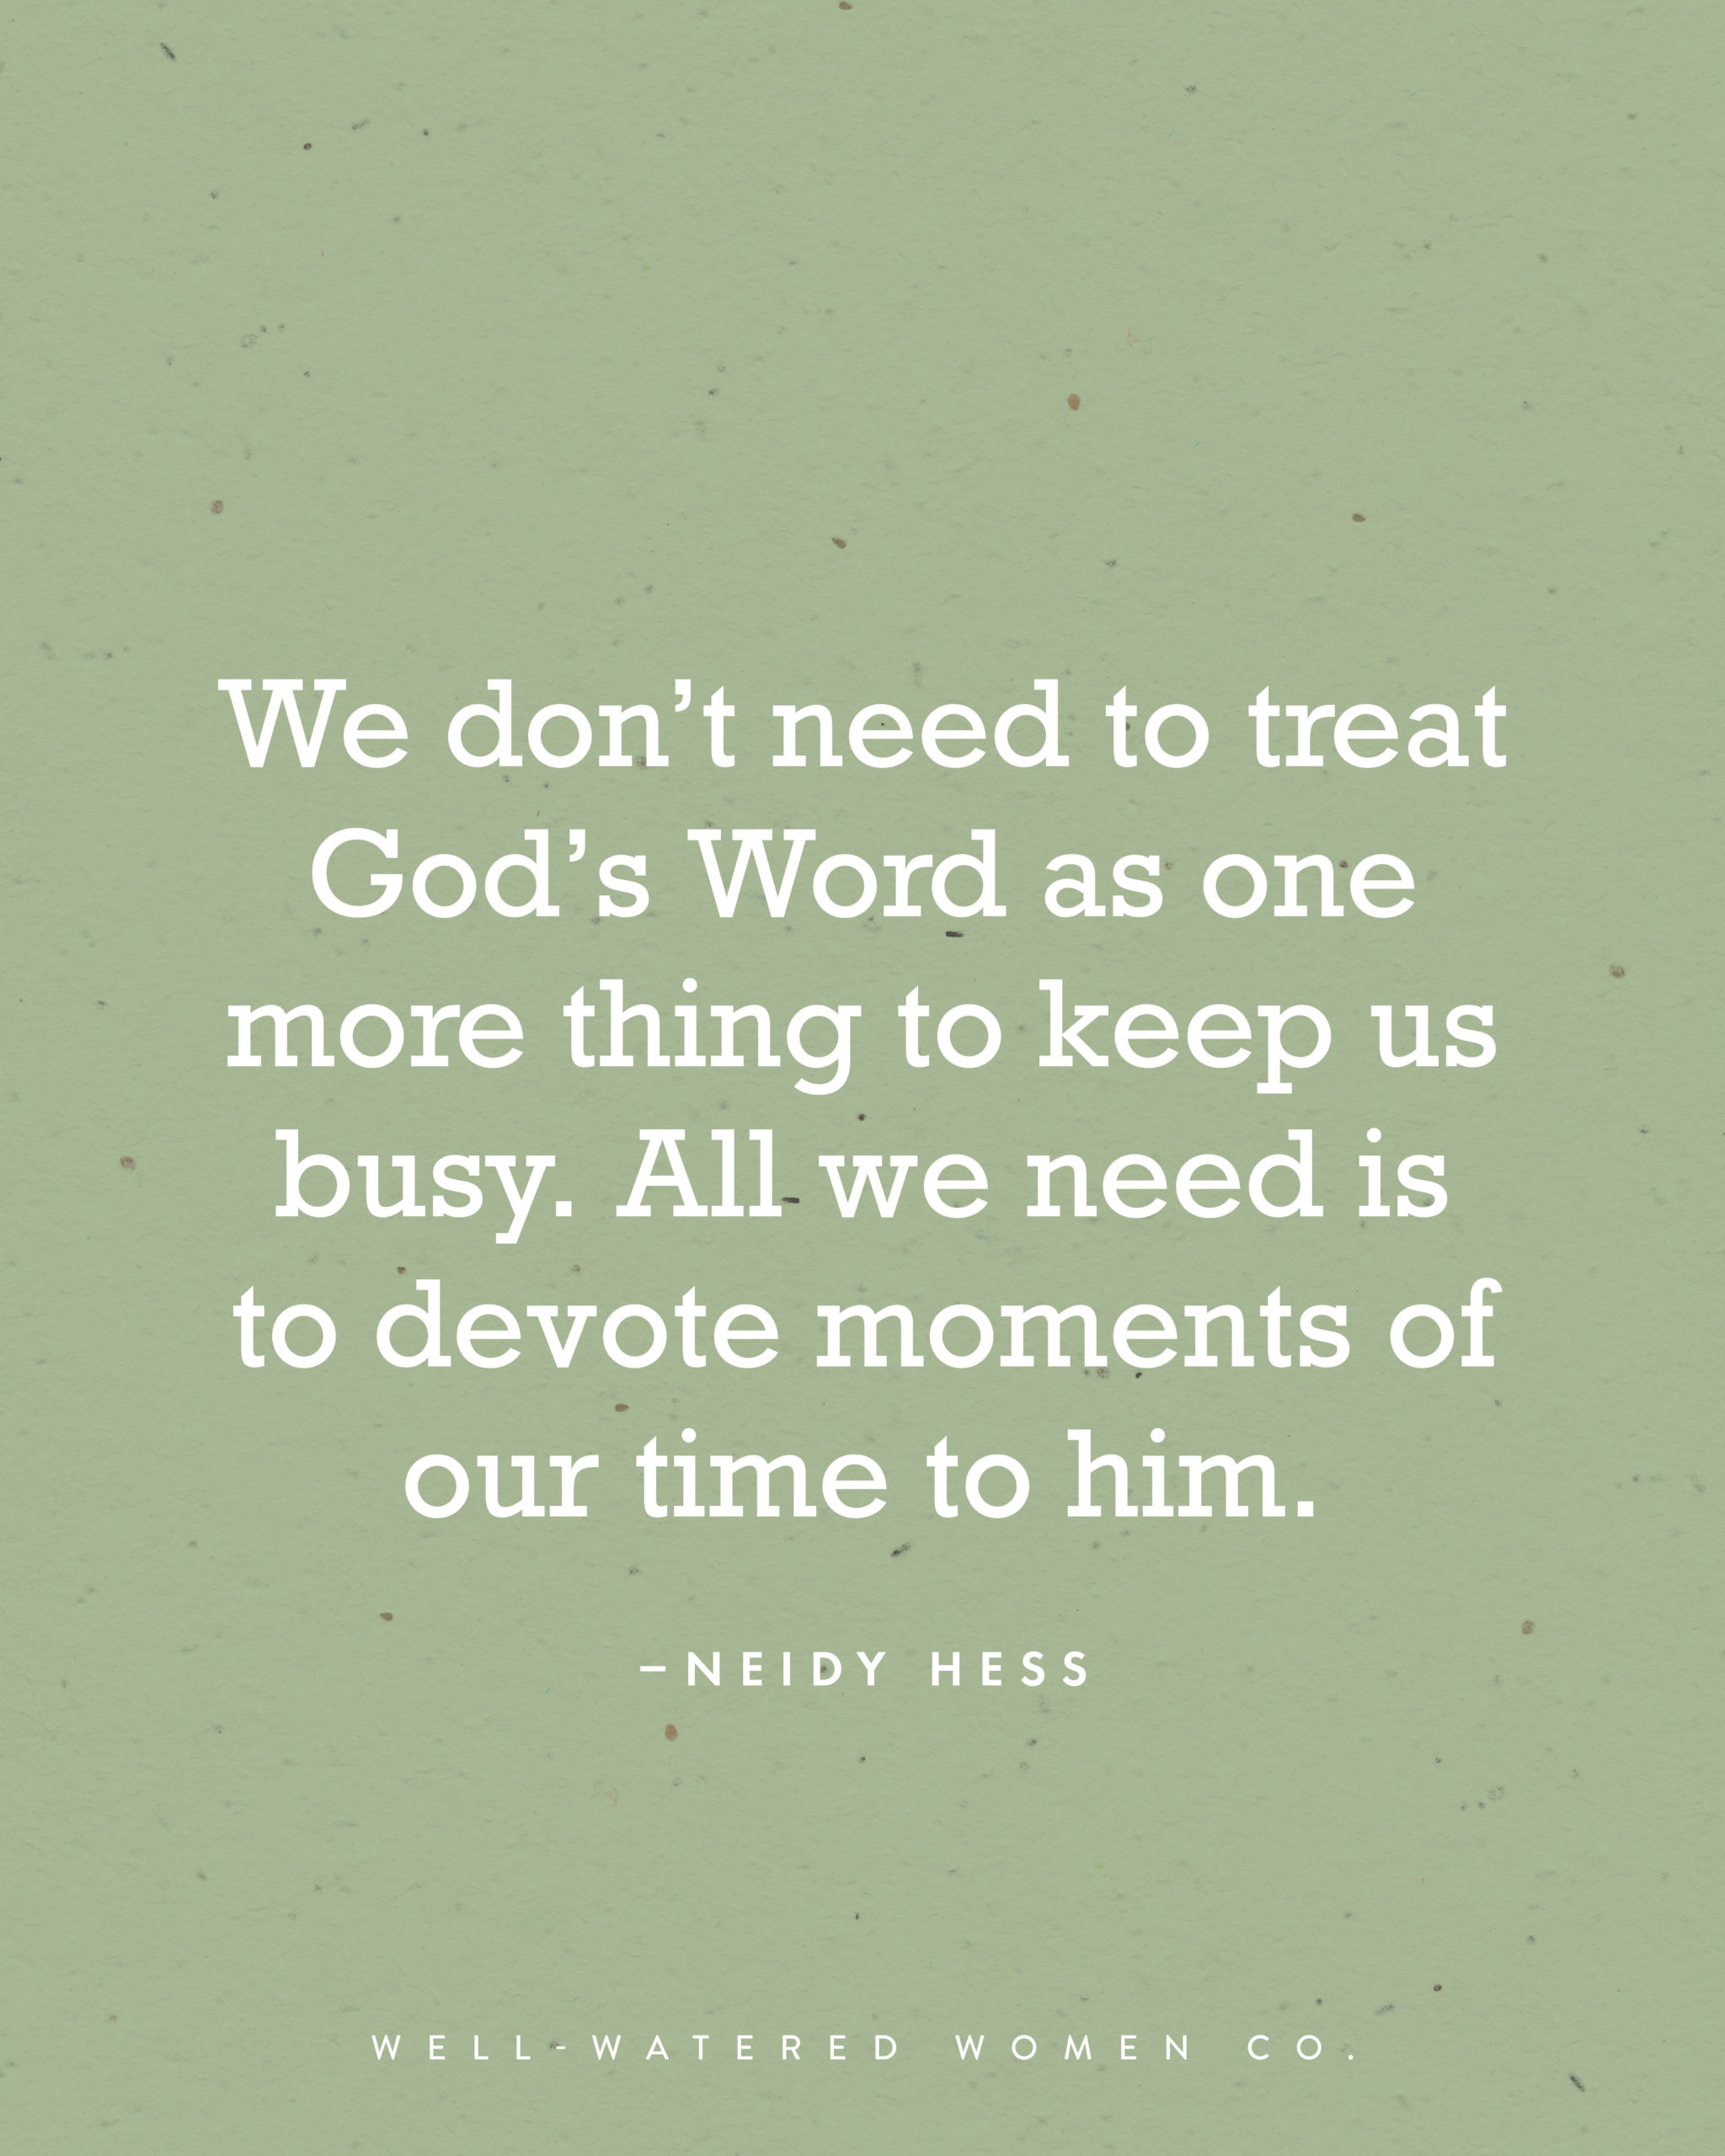 Too Busy for Bible Study? - an article from Well-Watered Women - quote